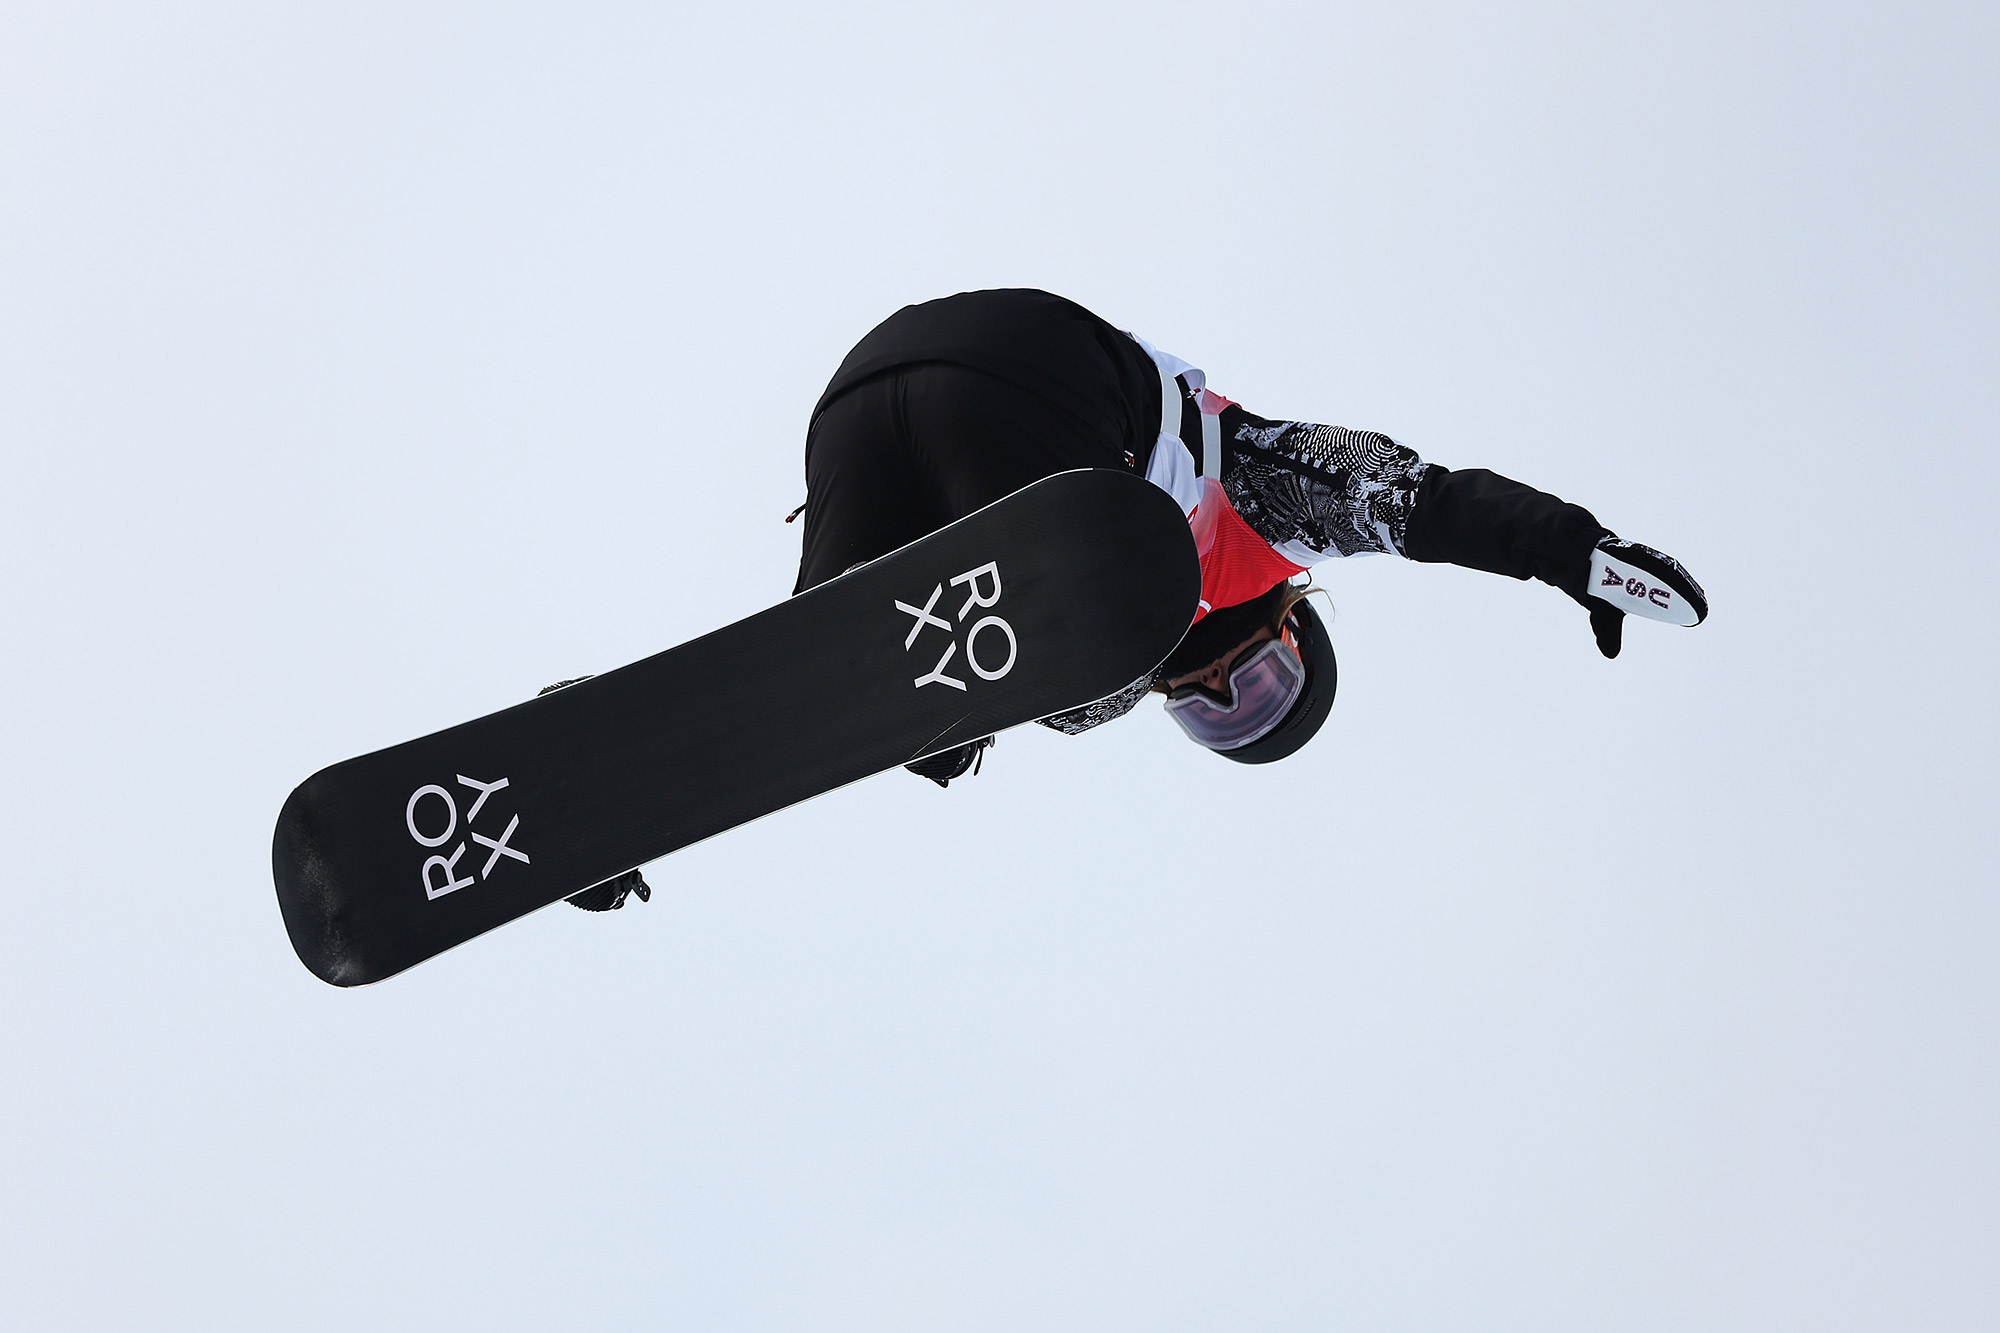 American snowboarder Chloe Kim competes in the halfpipe qualification round on Wednesday.